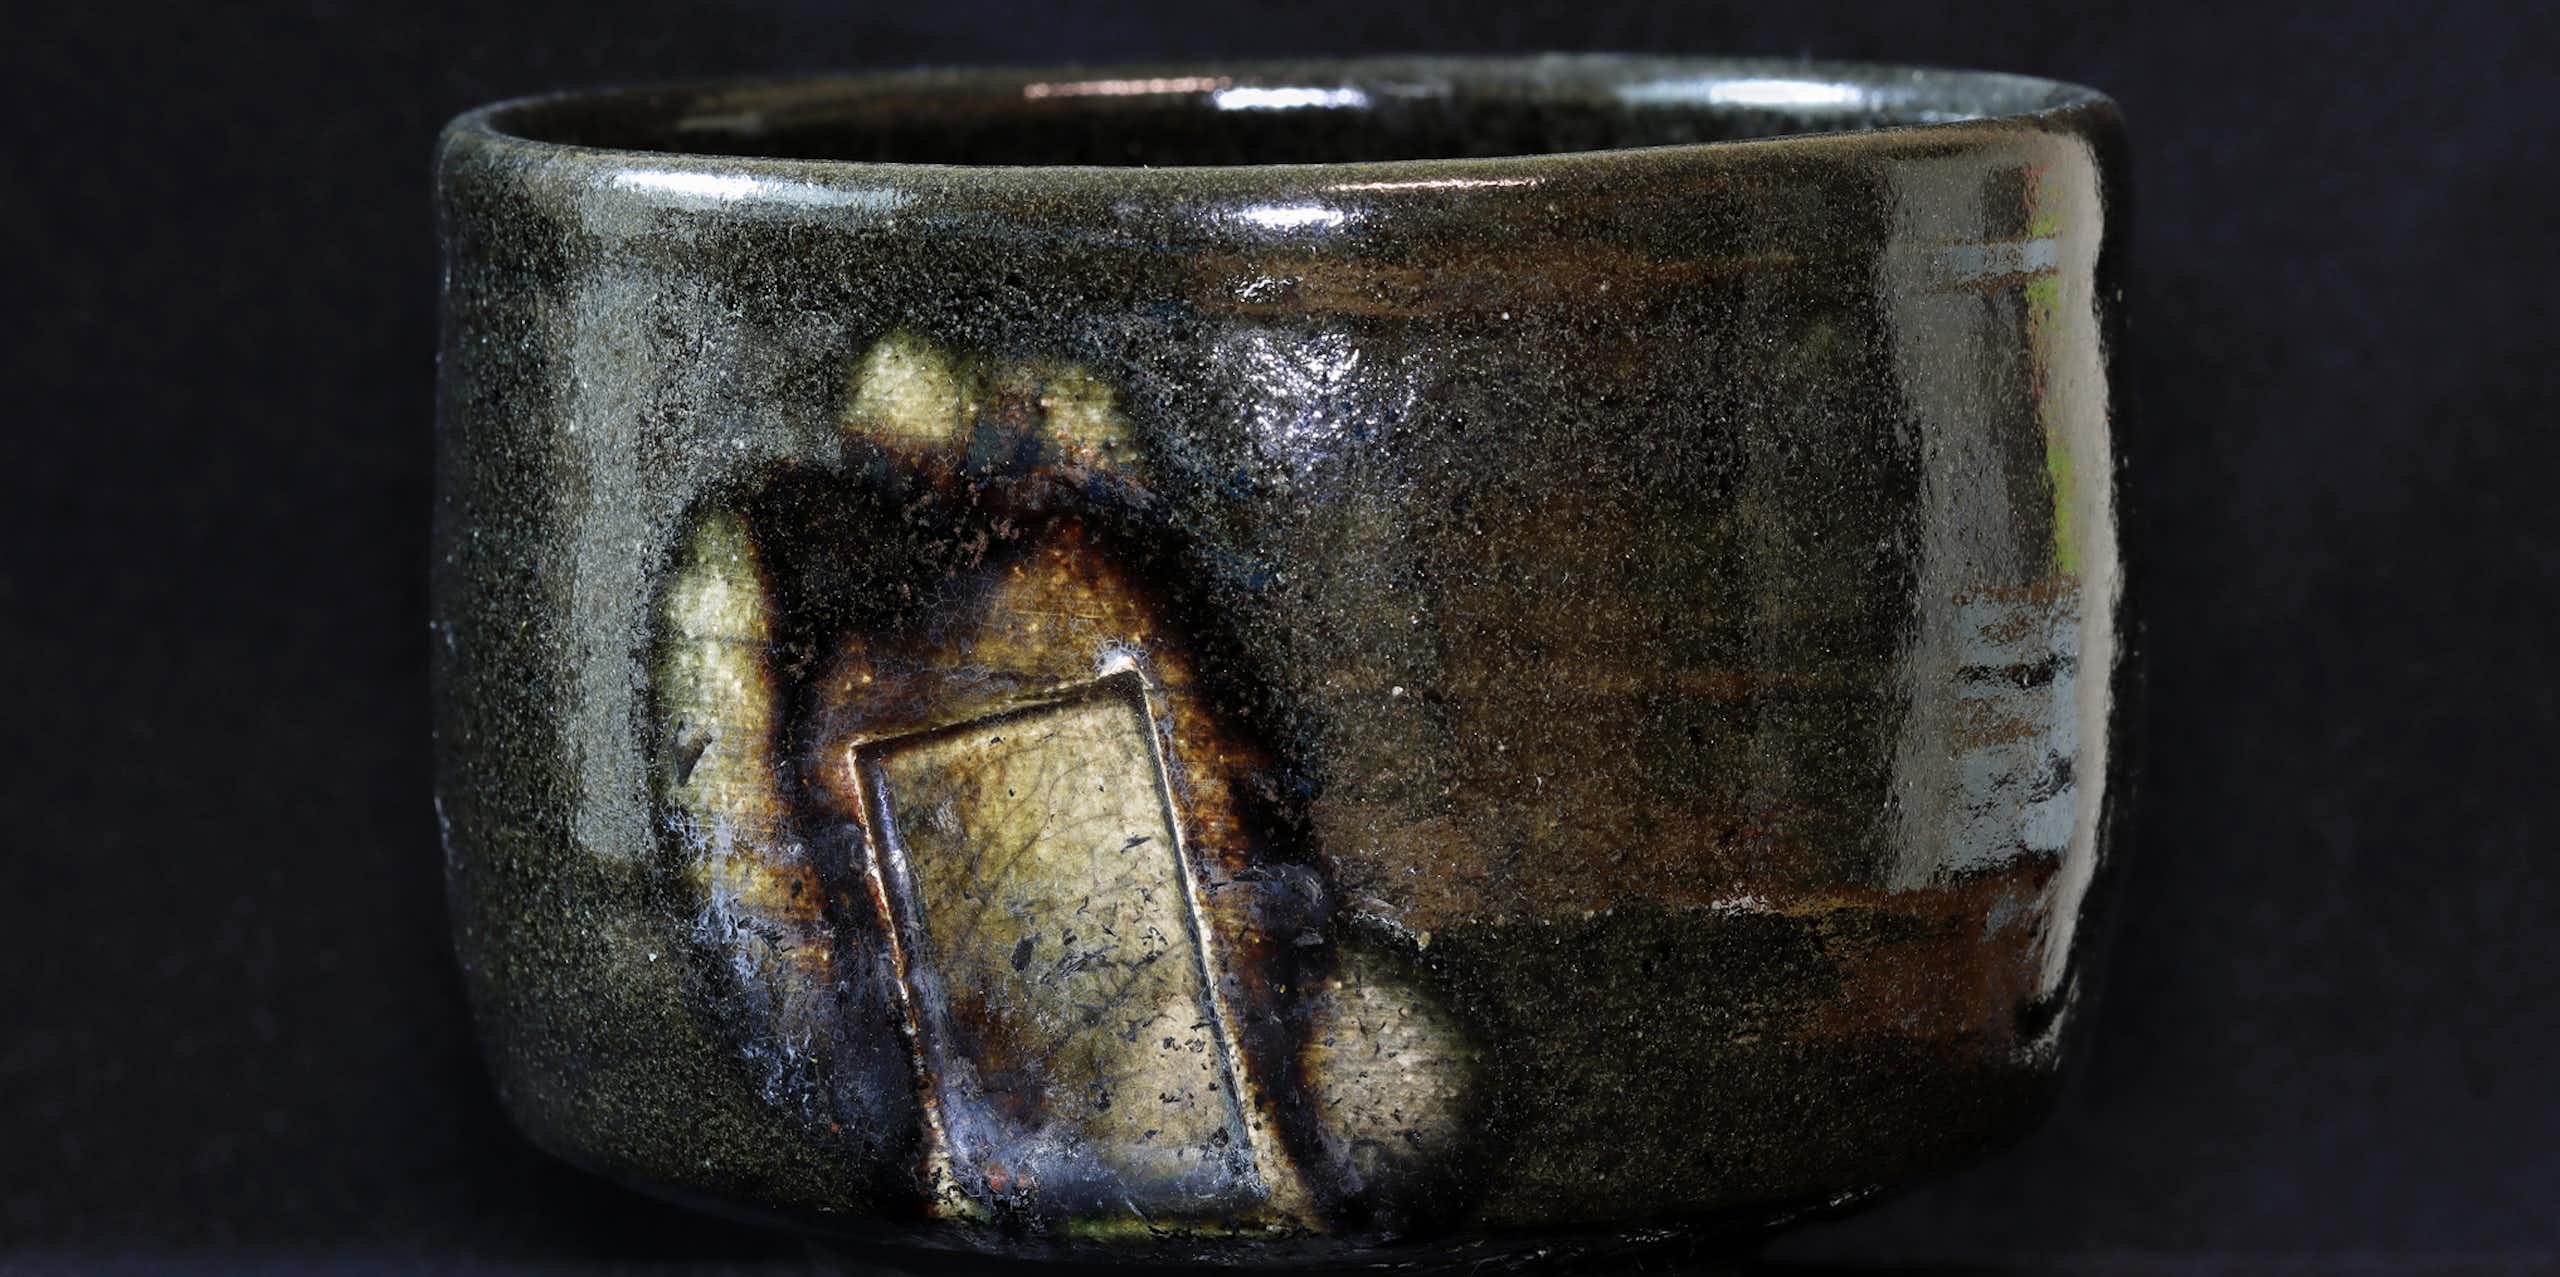 A gray, glazed bowl with brown and rusty sections, set against a dark background.